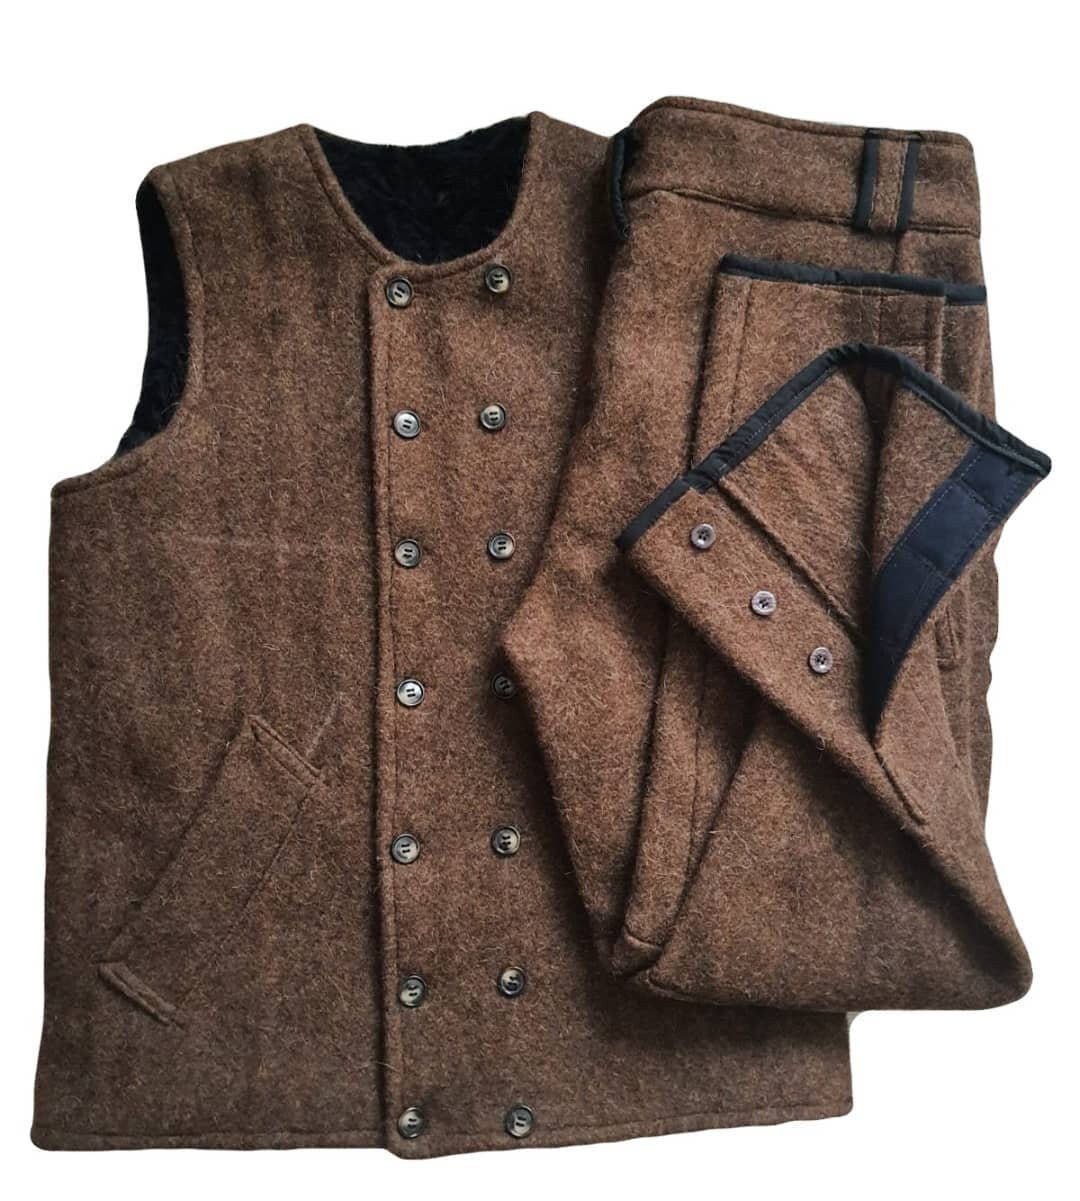 For Bloem Custom Size,  Bushcraft Handmade Brown Pants and Vest, Please enter body sizes when you order, You will be ready for adventure,  99percenthandmade   